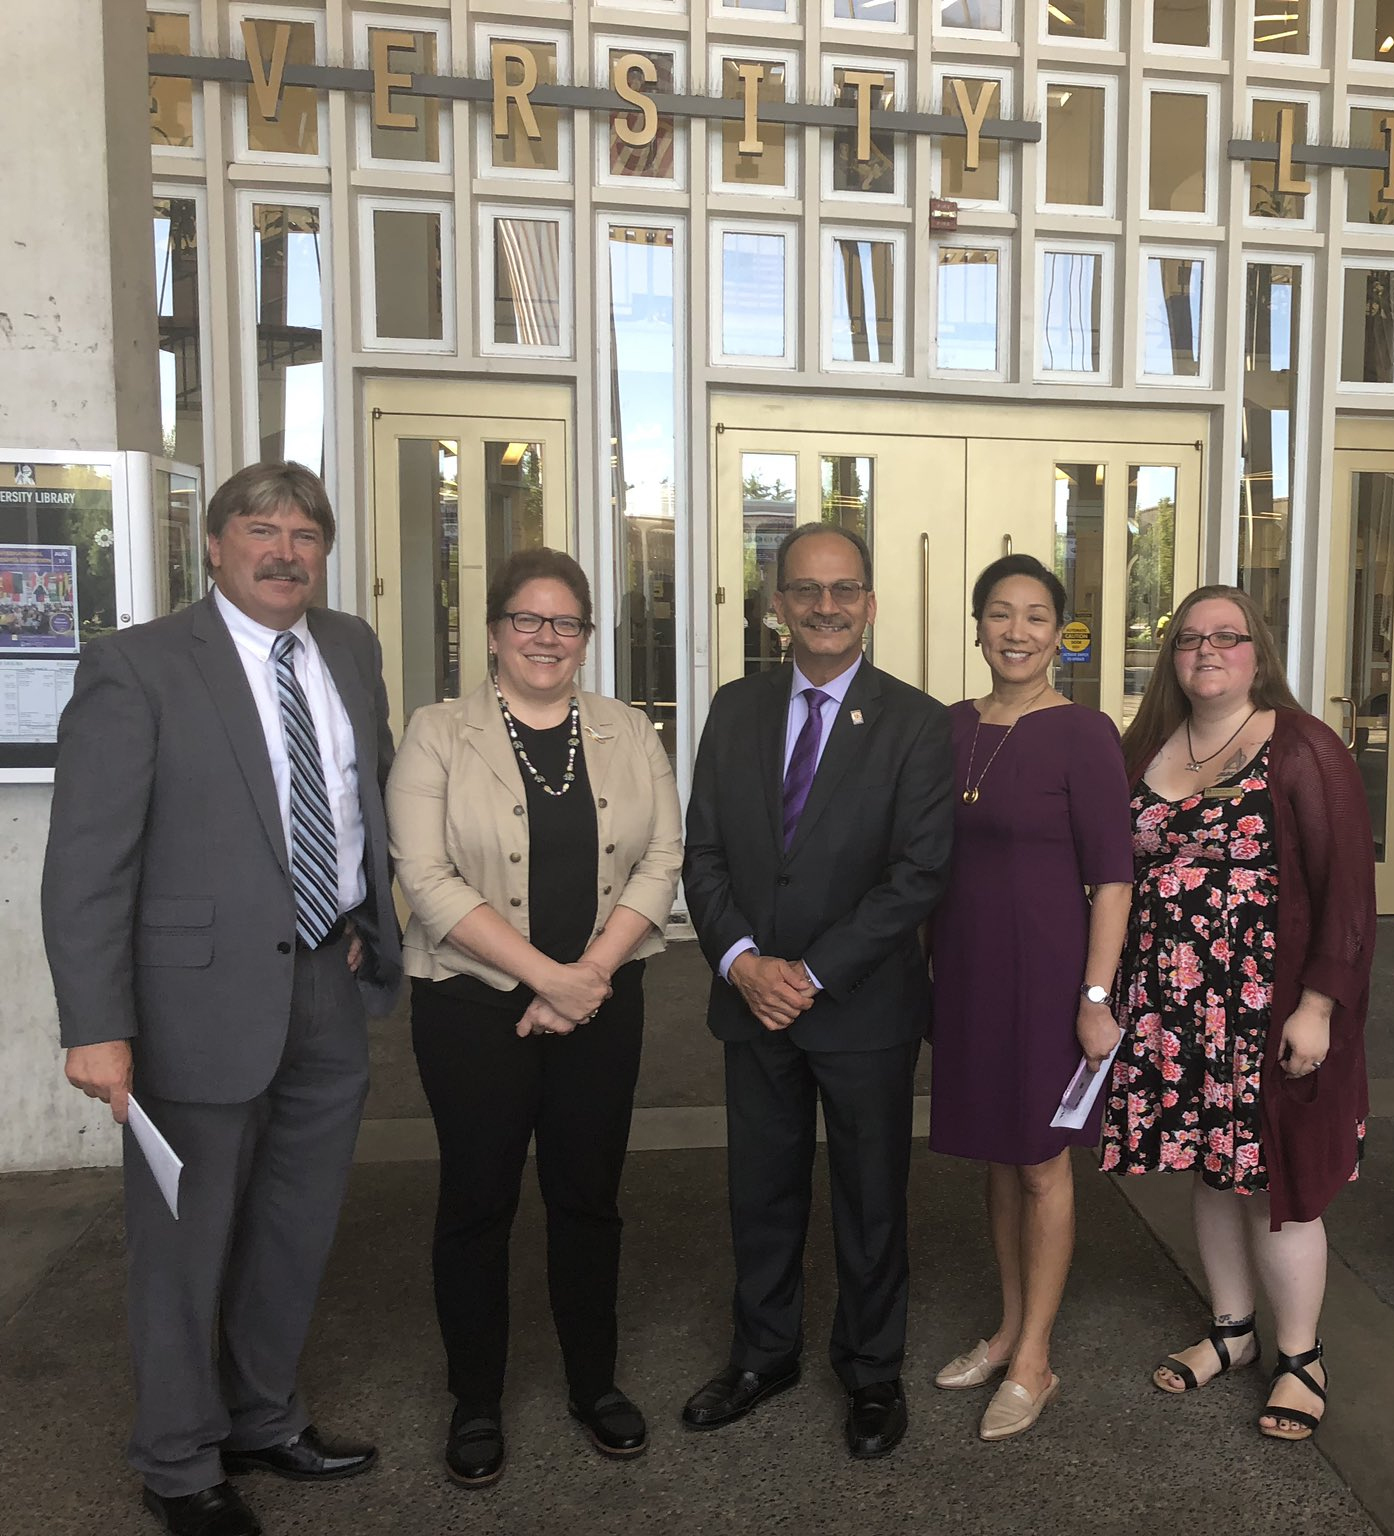 From left to right: Vice President for Finance and Administration Todd Foreman, Dean Rebecca Mugridge, President Havidán Rodríguez, Provost Carol Kim, and event-organizer Amanda Lowe